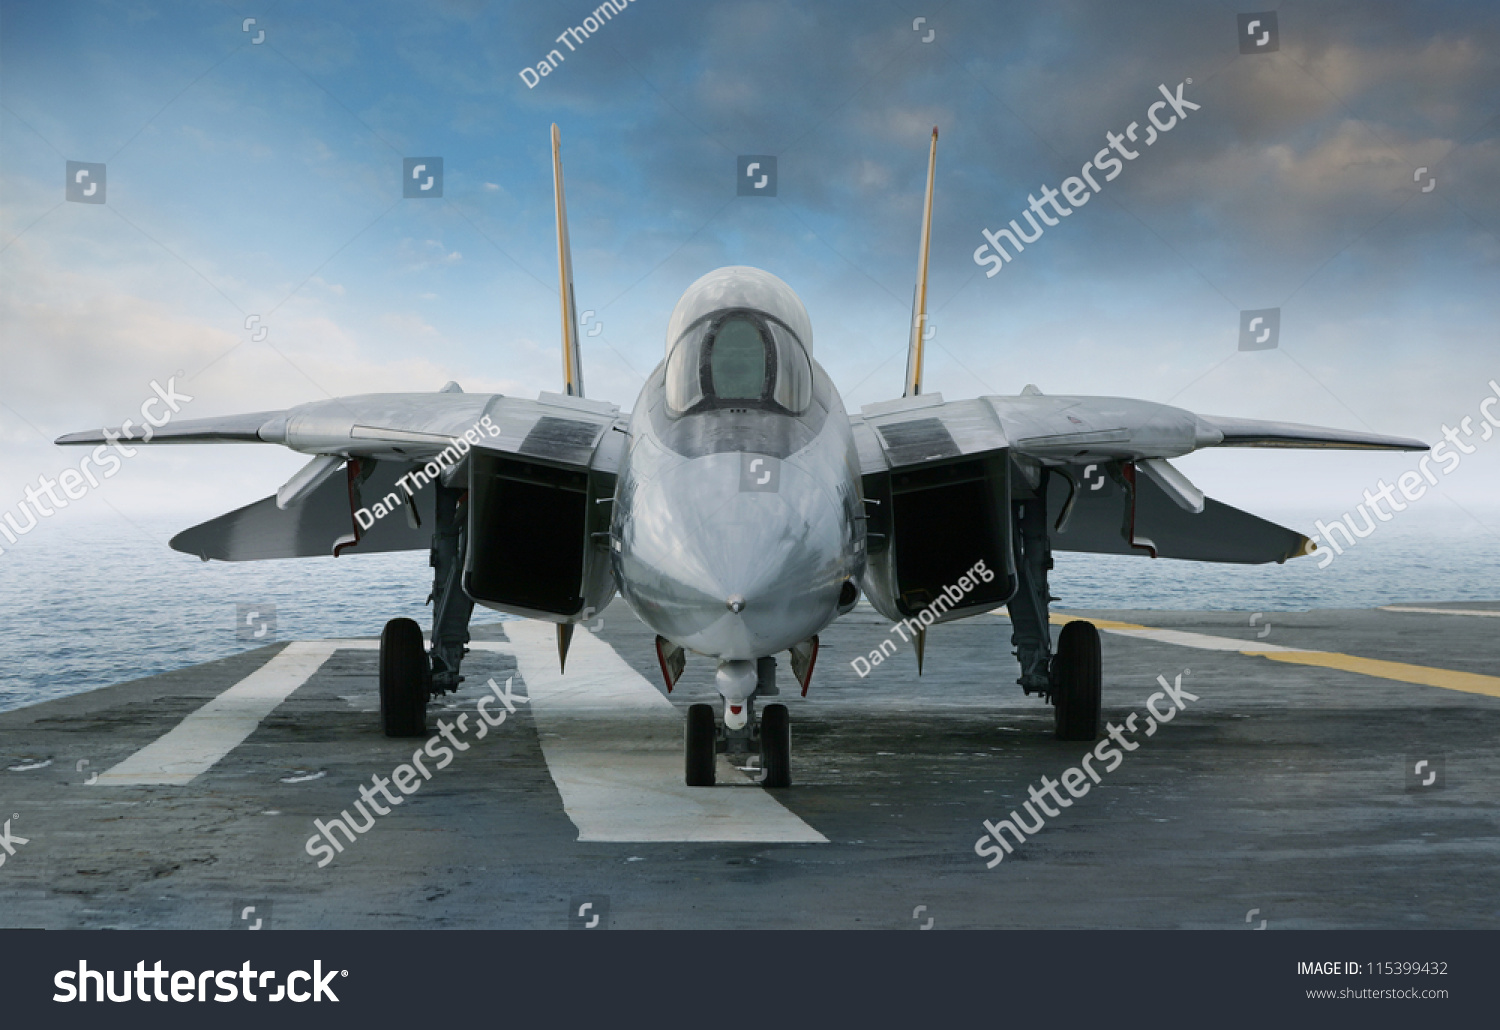 An F-14 jet fighter on an aircraft carrier deck beneath blue sky and clouds viewed from front #115399432